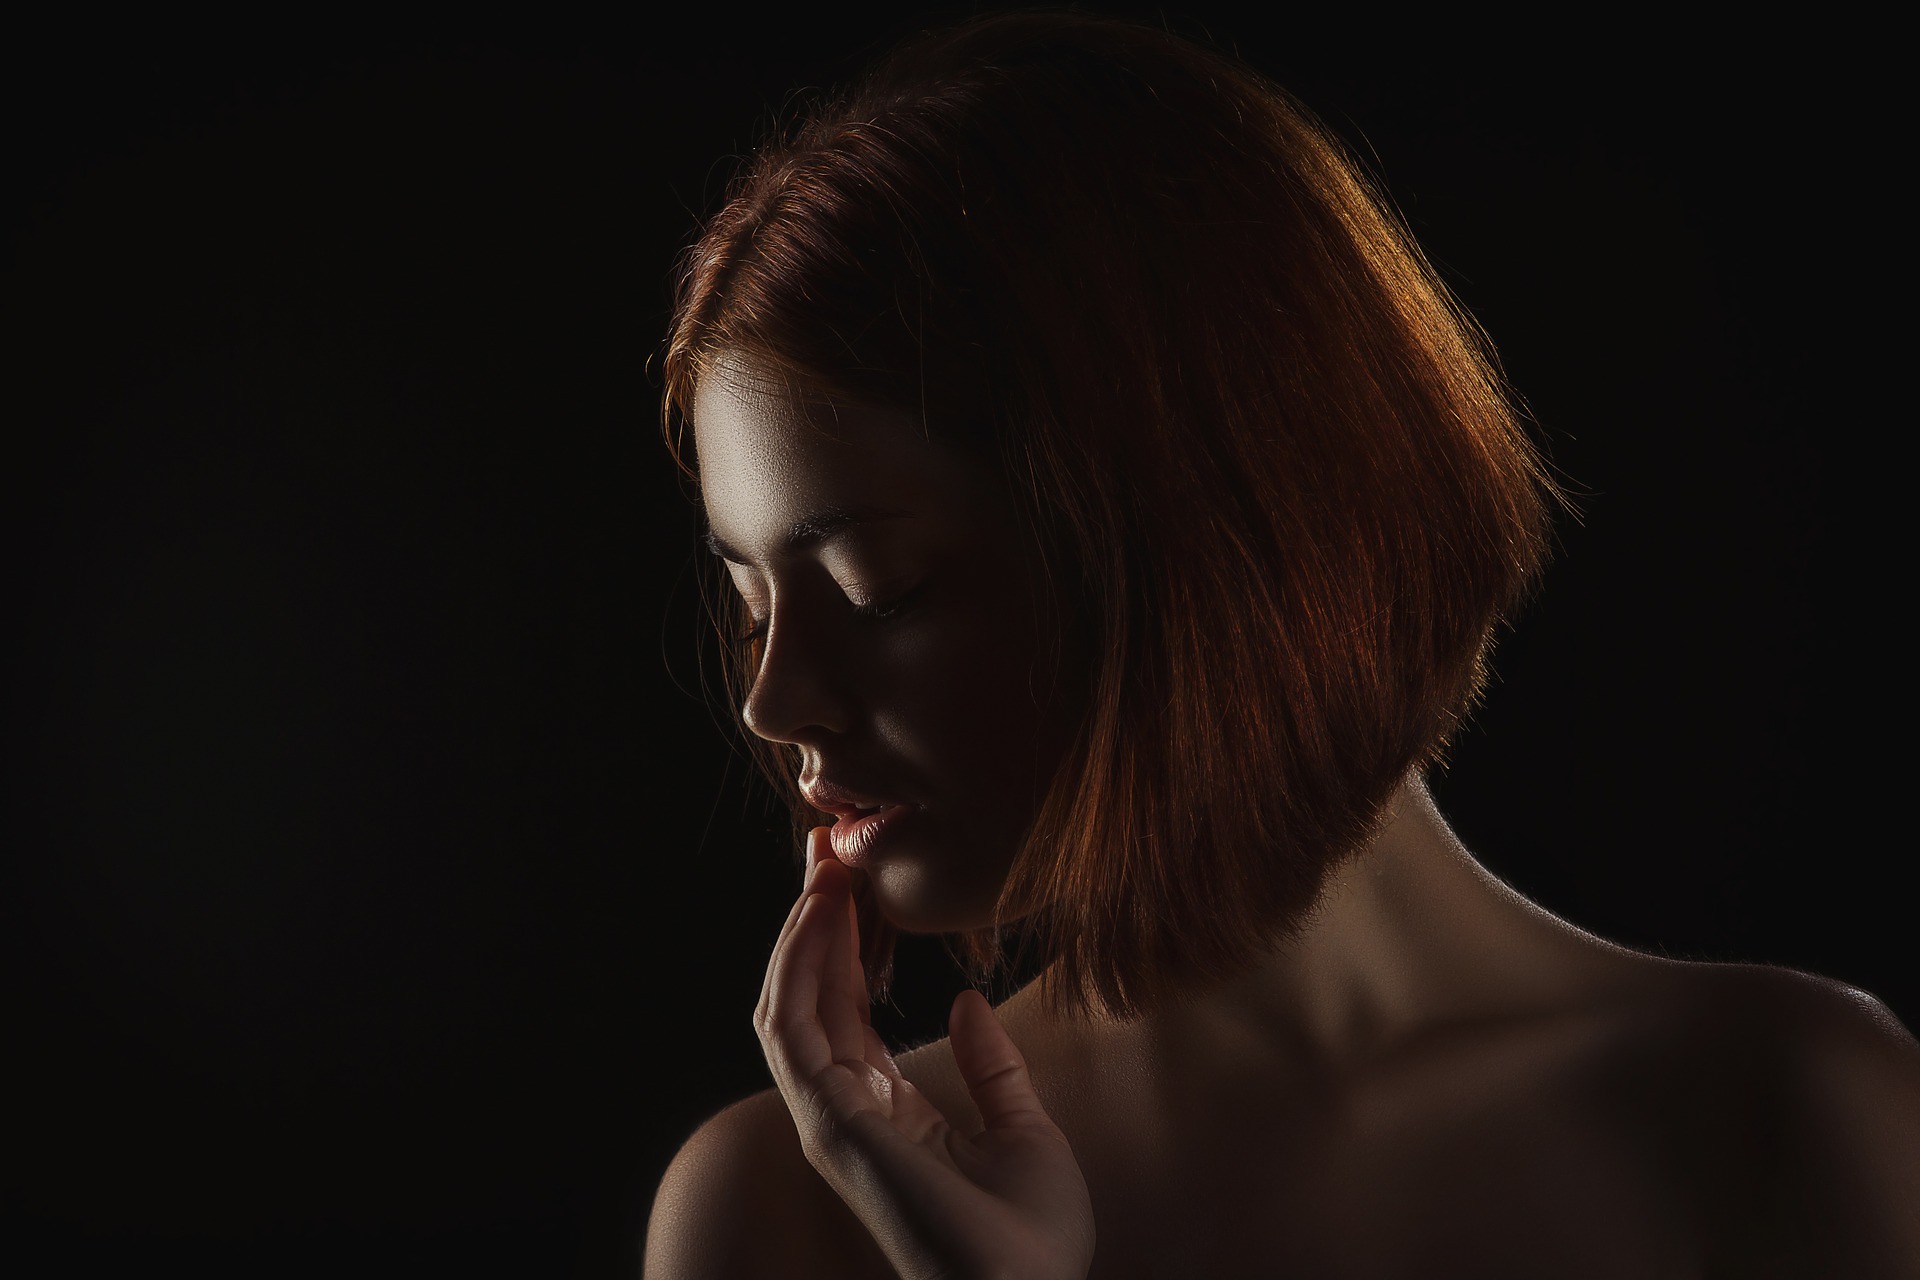 artistic shot of woman with red-haired bob-cut and no top on touching her lips, black background